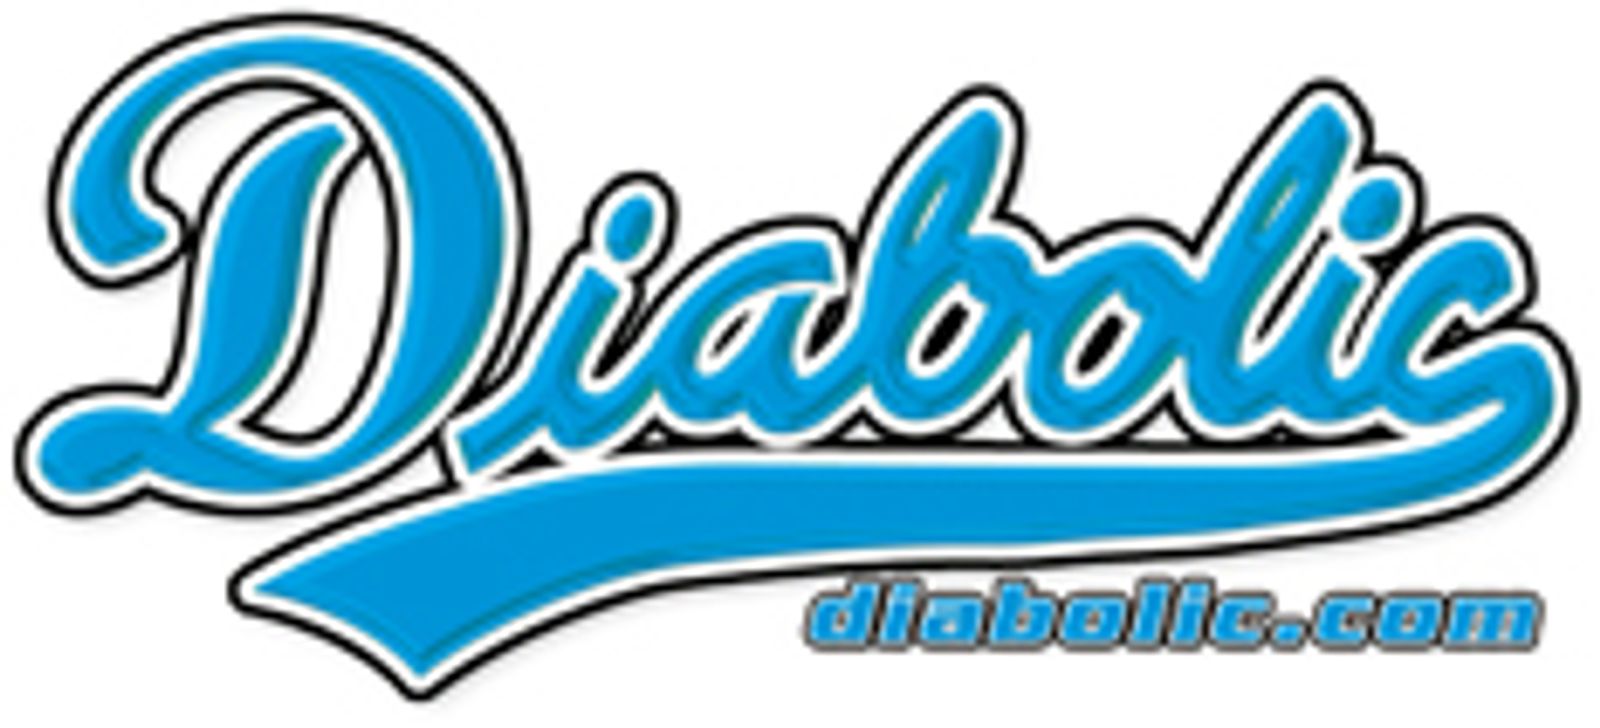 Diabolic Returns with New Releases Every Tuesday